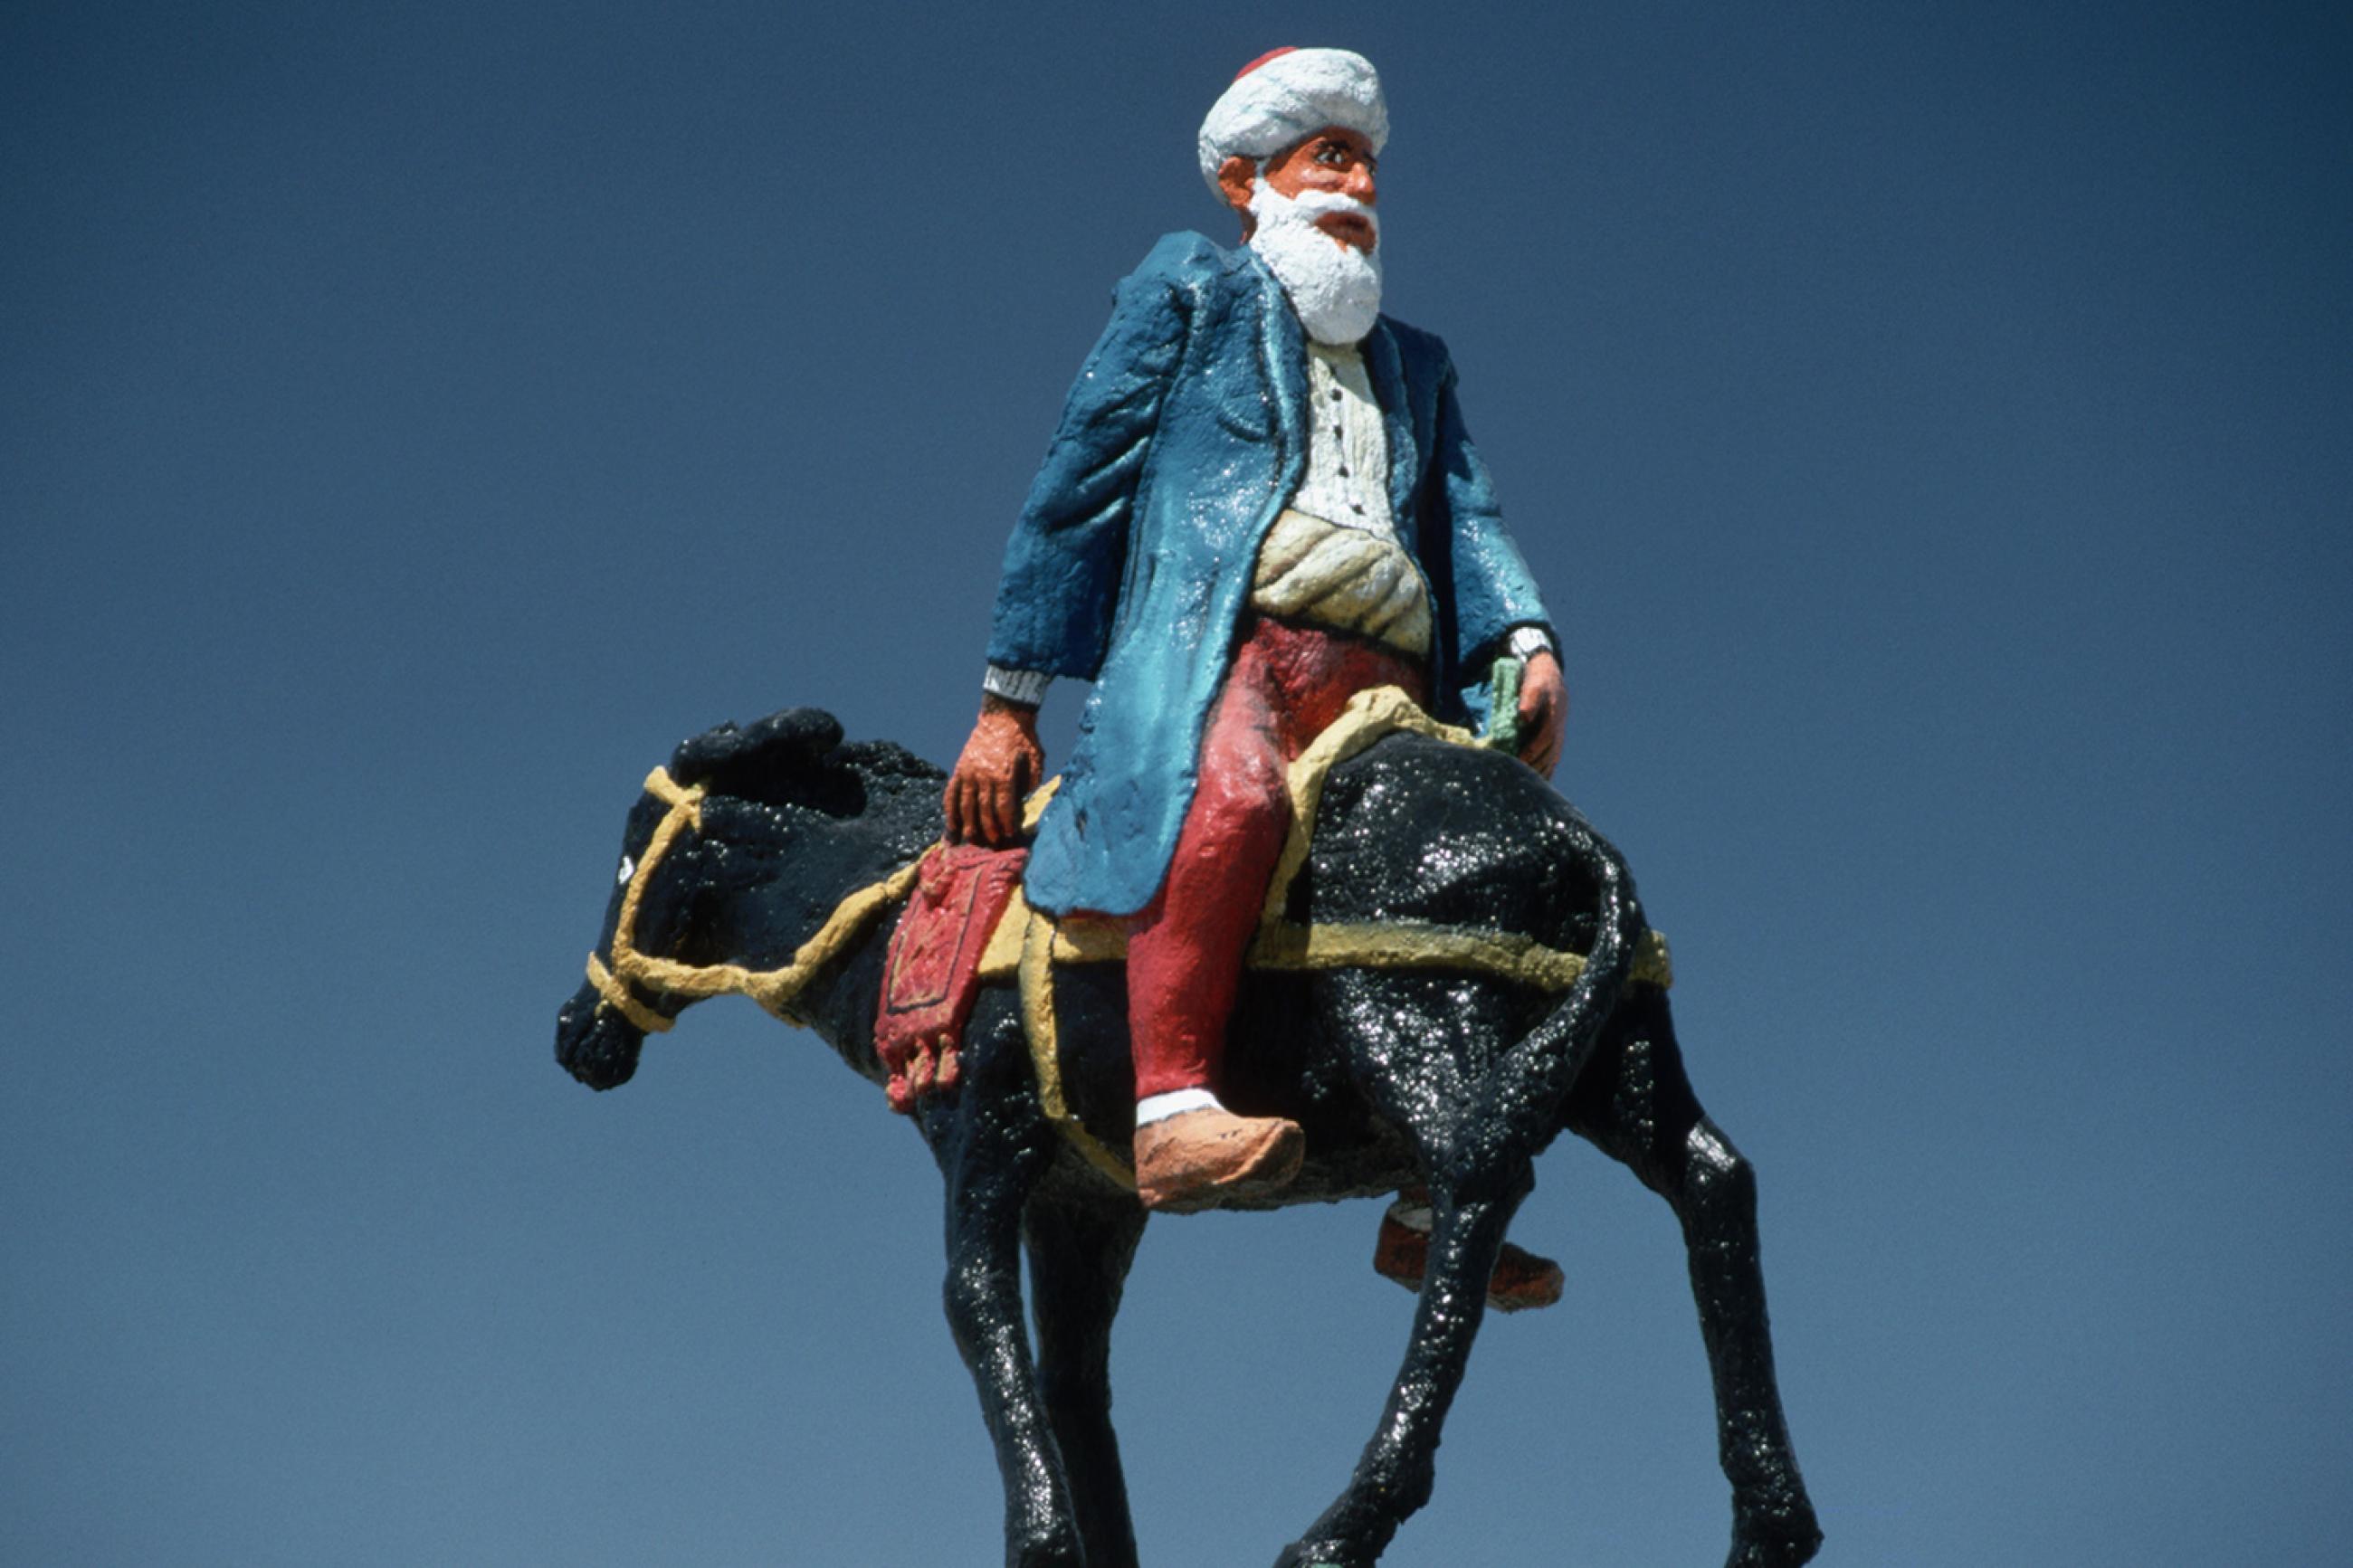 Statue of the Turkish Folkloric Figure Nasreddin Hoca, who looked for his keys in a well-lit place because it was too dark to look for them where they were. Photo shows a statue of the famous figure riding backward on a donkey. GETTY Images/Corbis/Chris Hellier